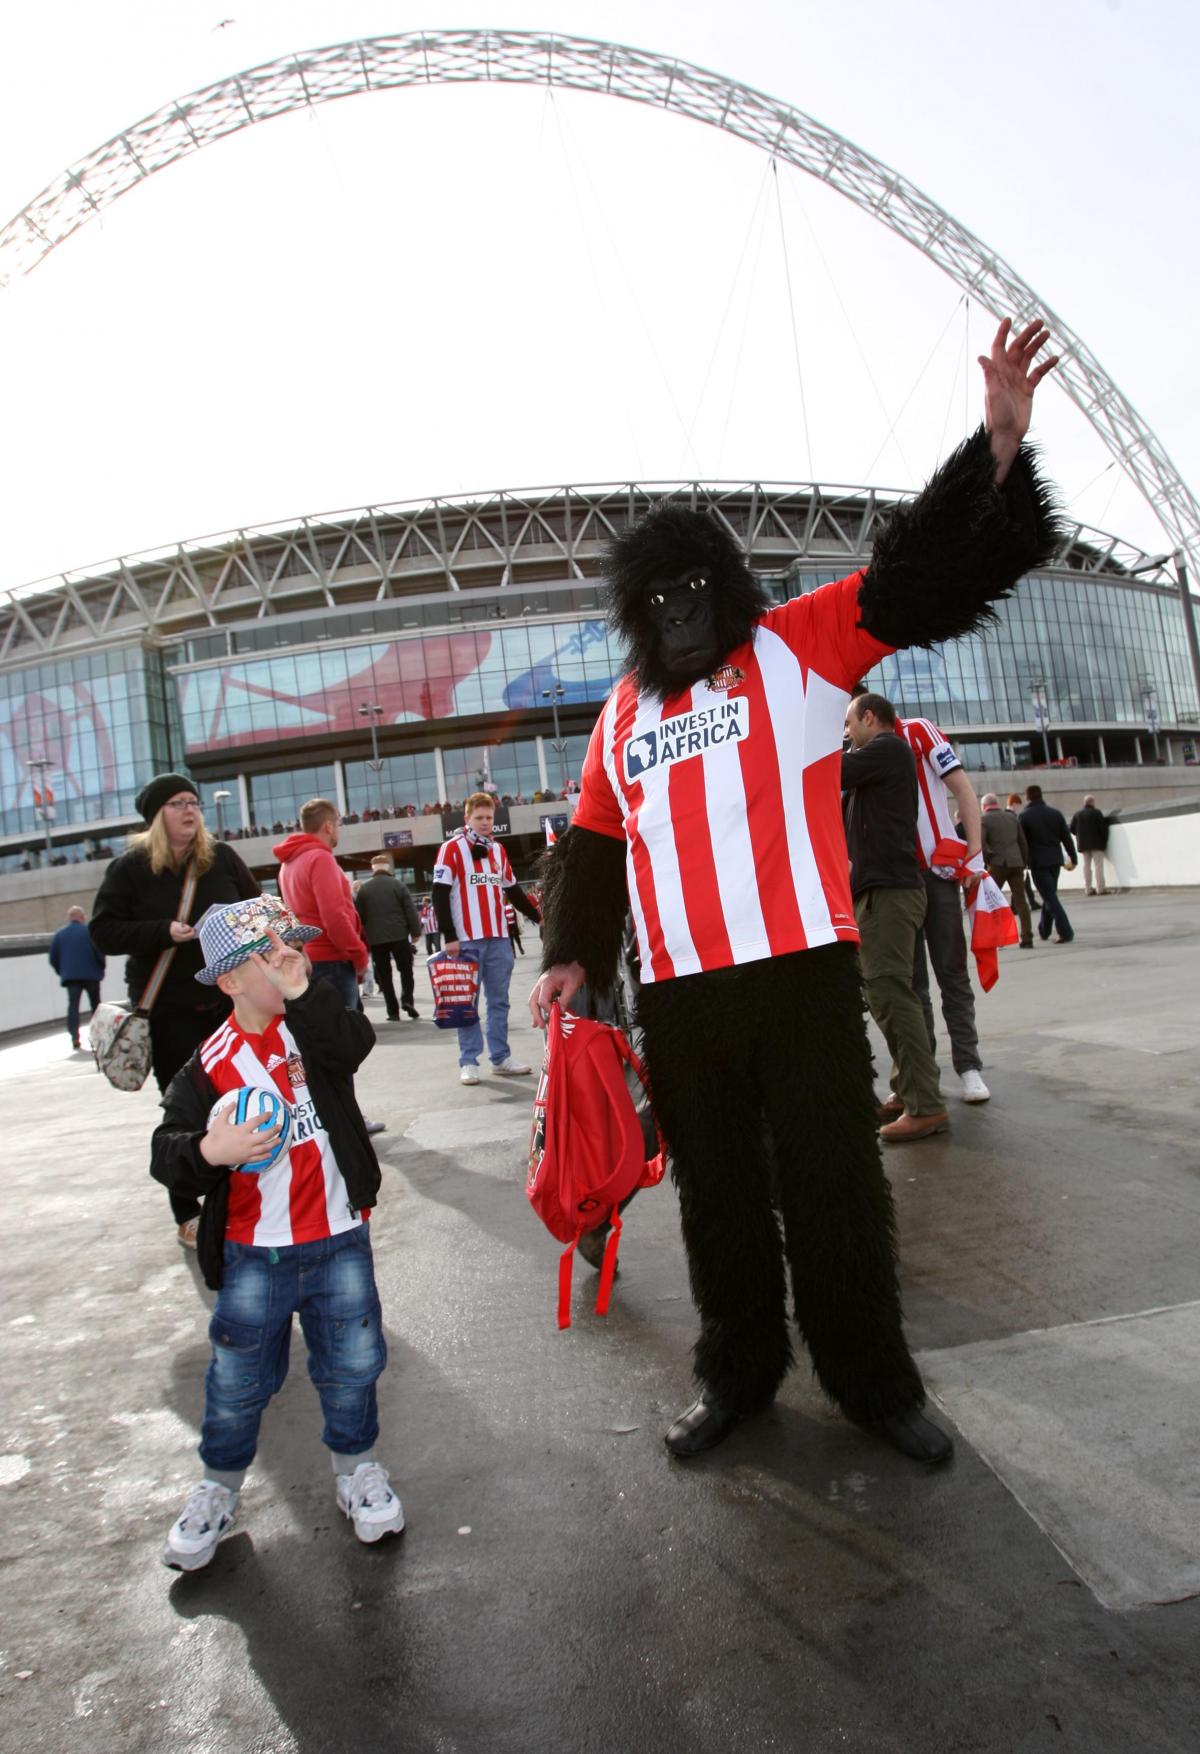 Pictures from Sunderland v Manchester City in the Capital One Cup Final at Wembley.